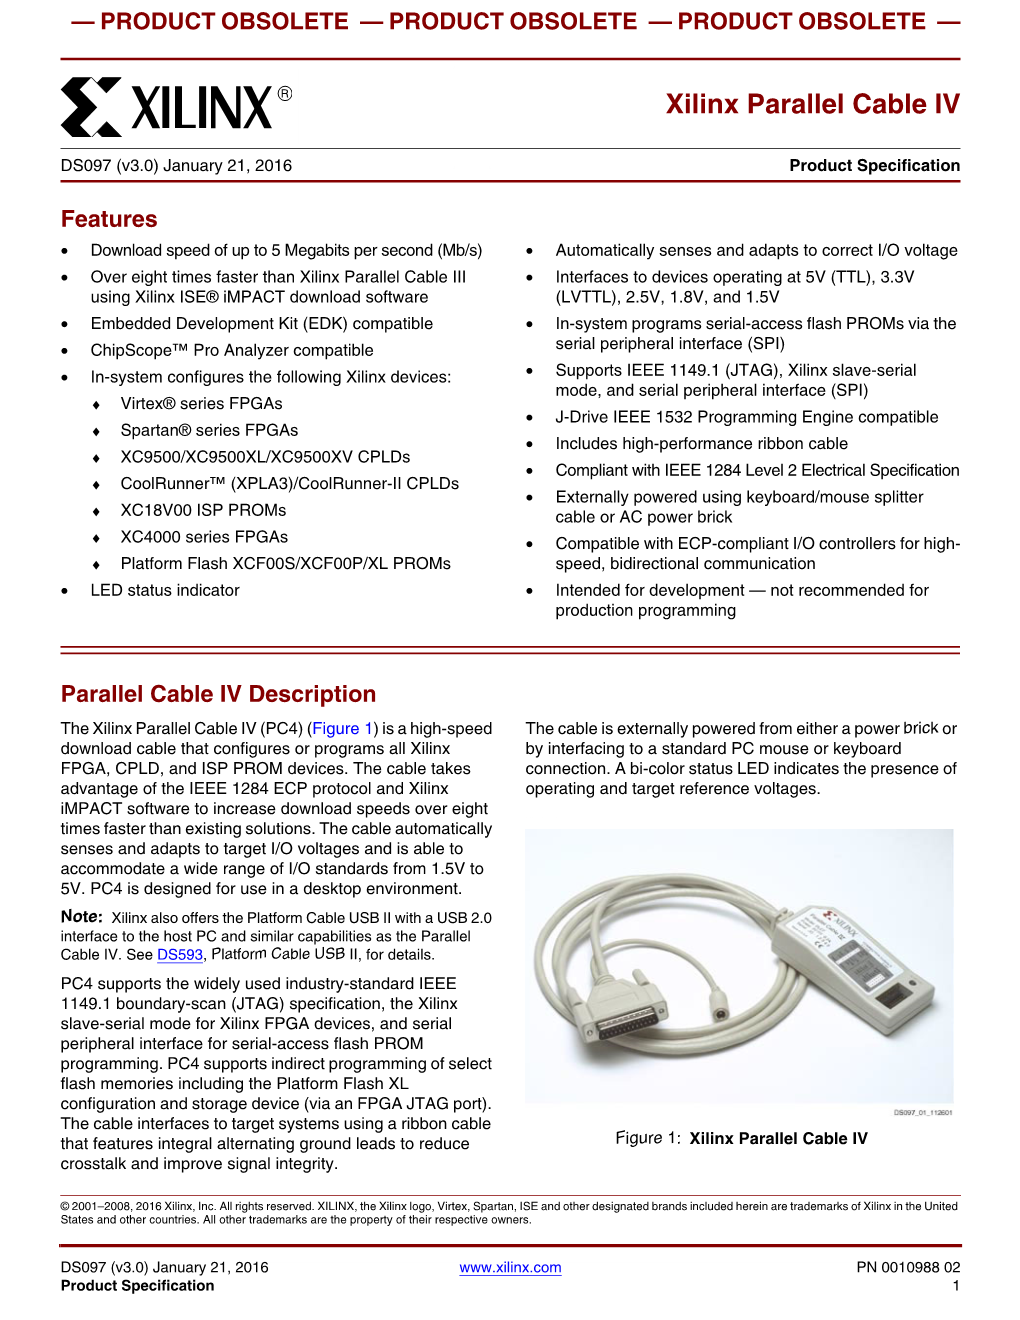 Xilinx Parallel Cable IV Data Sheet